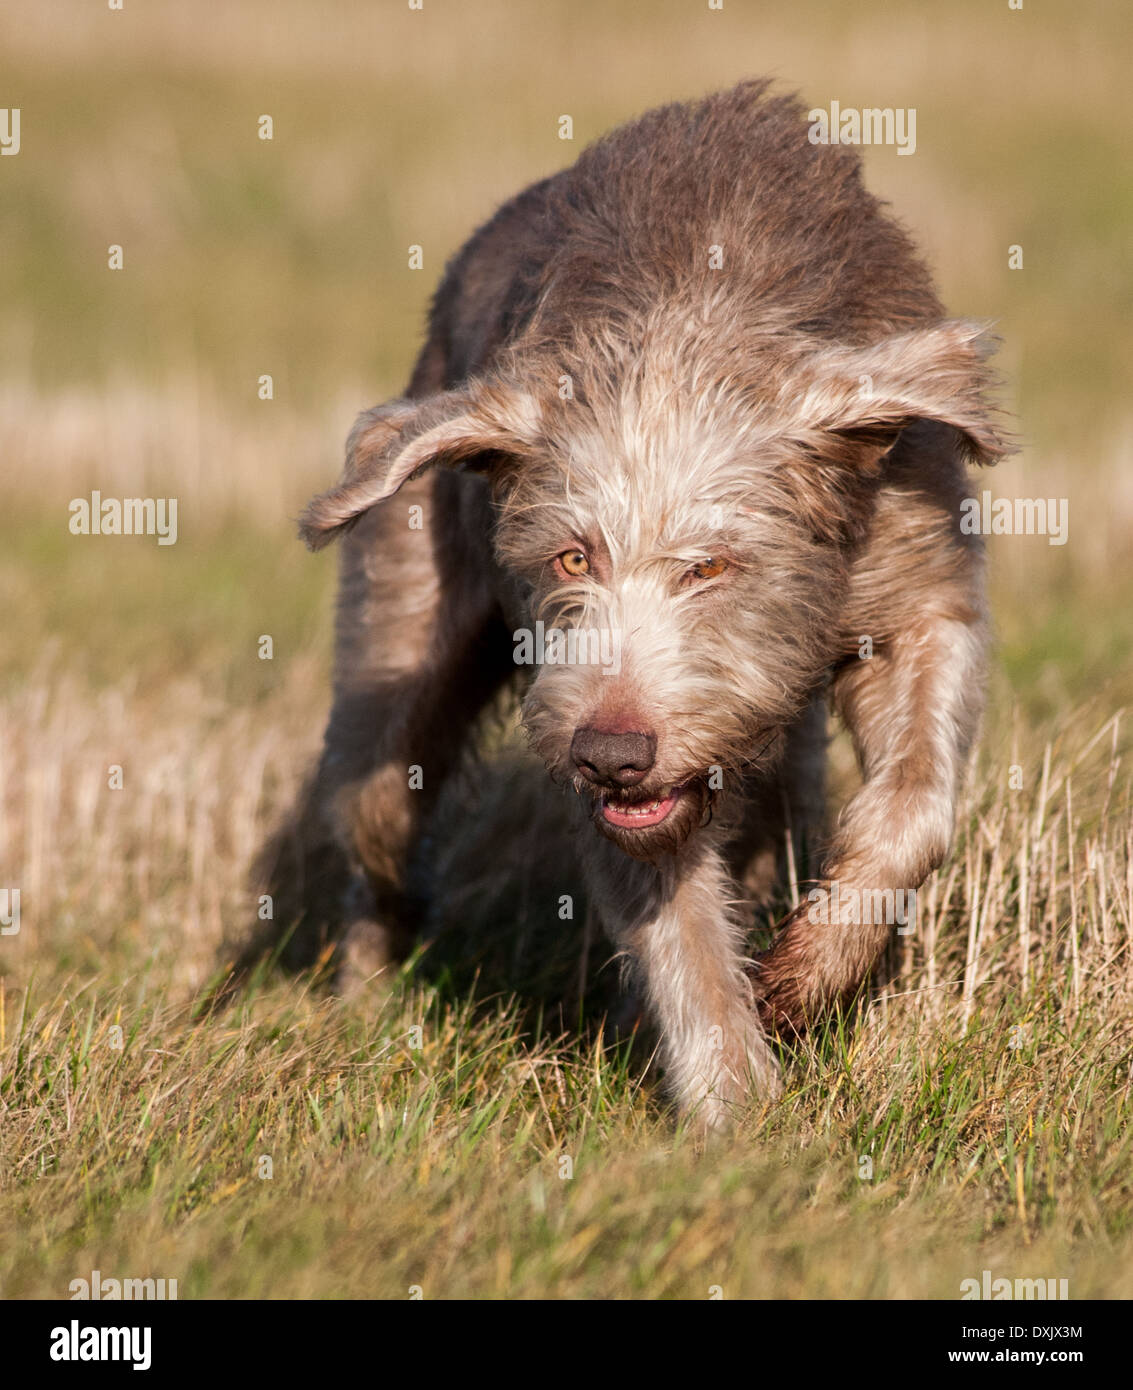 A portrait shot of a Slovak Wirehaired Pointer, or Slovakian Rough-haired Pointer dog Stock Photo